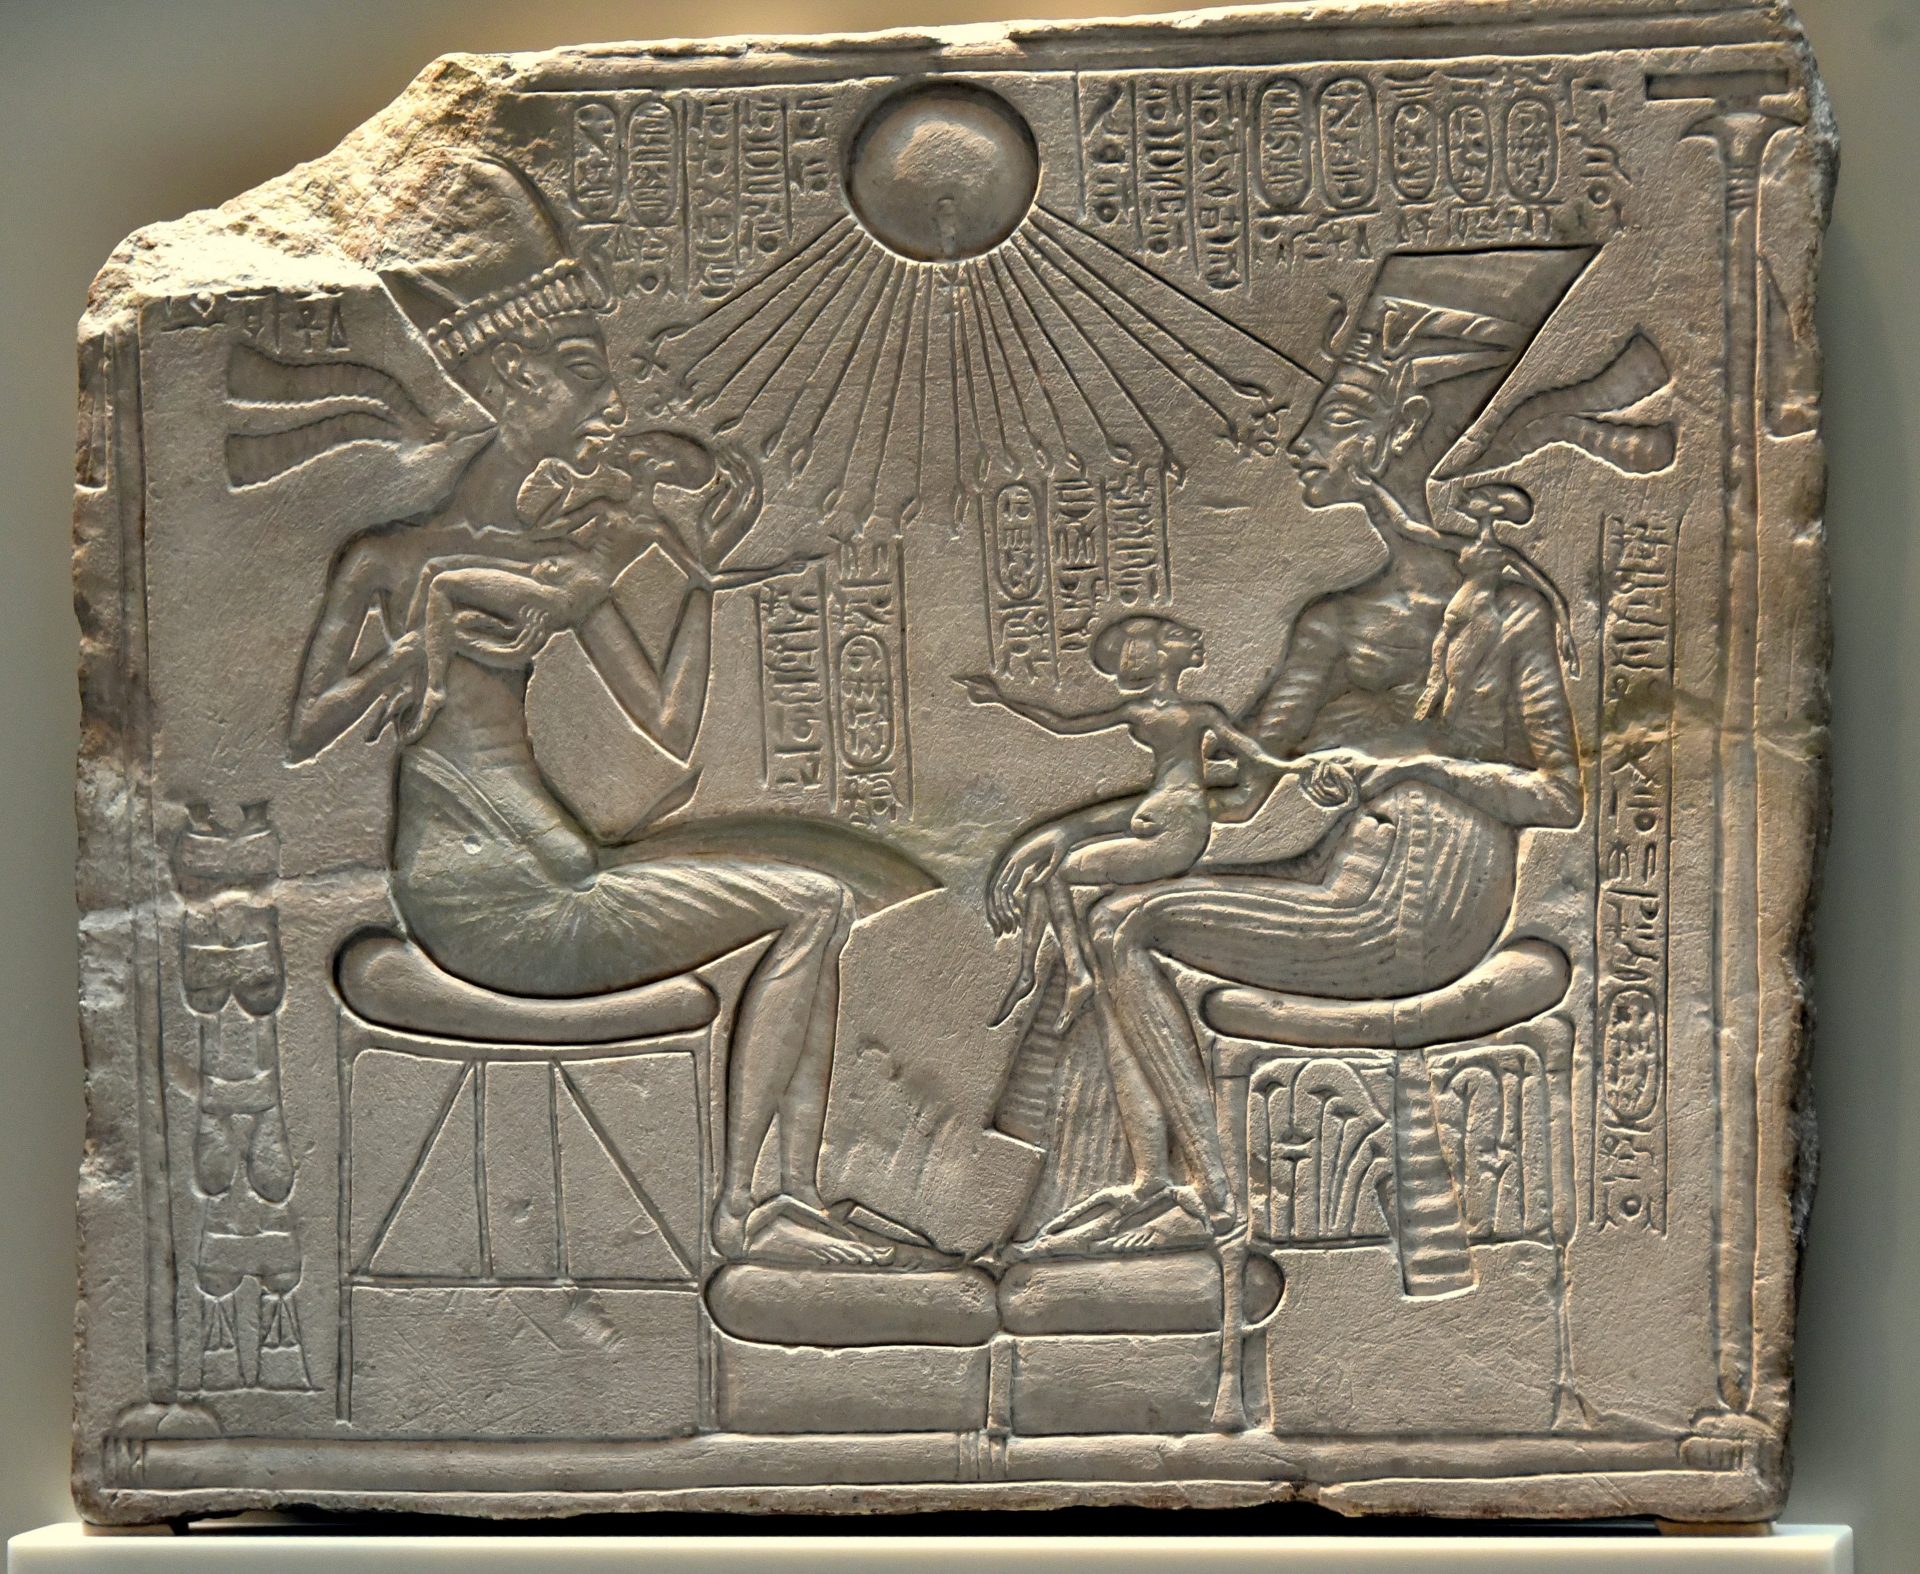 Egyptian stone carving showing the sun shining on the king, the queen and their three daughters